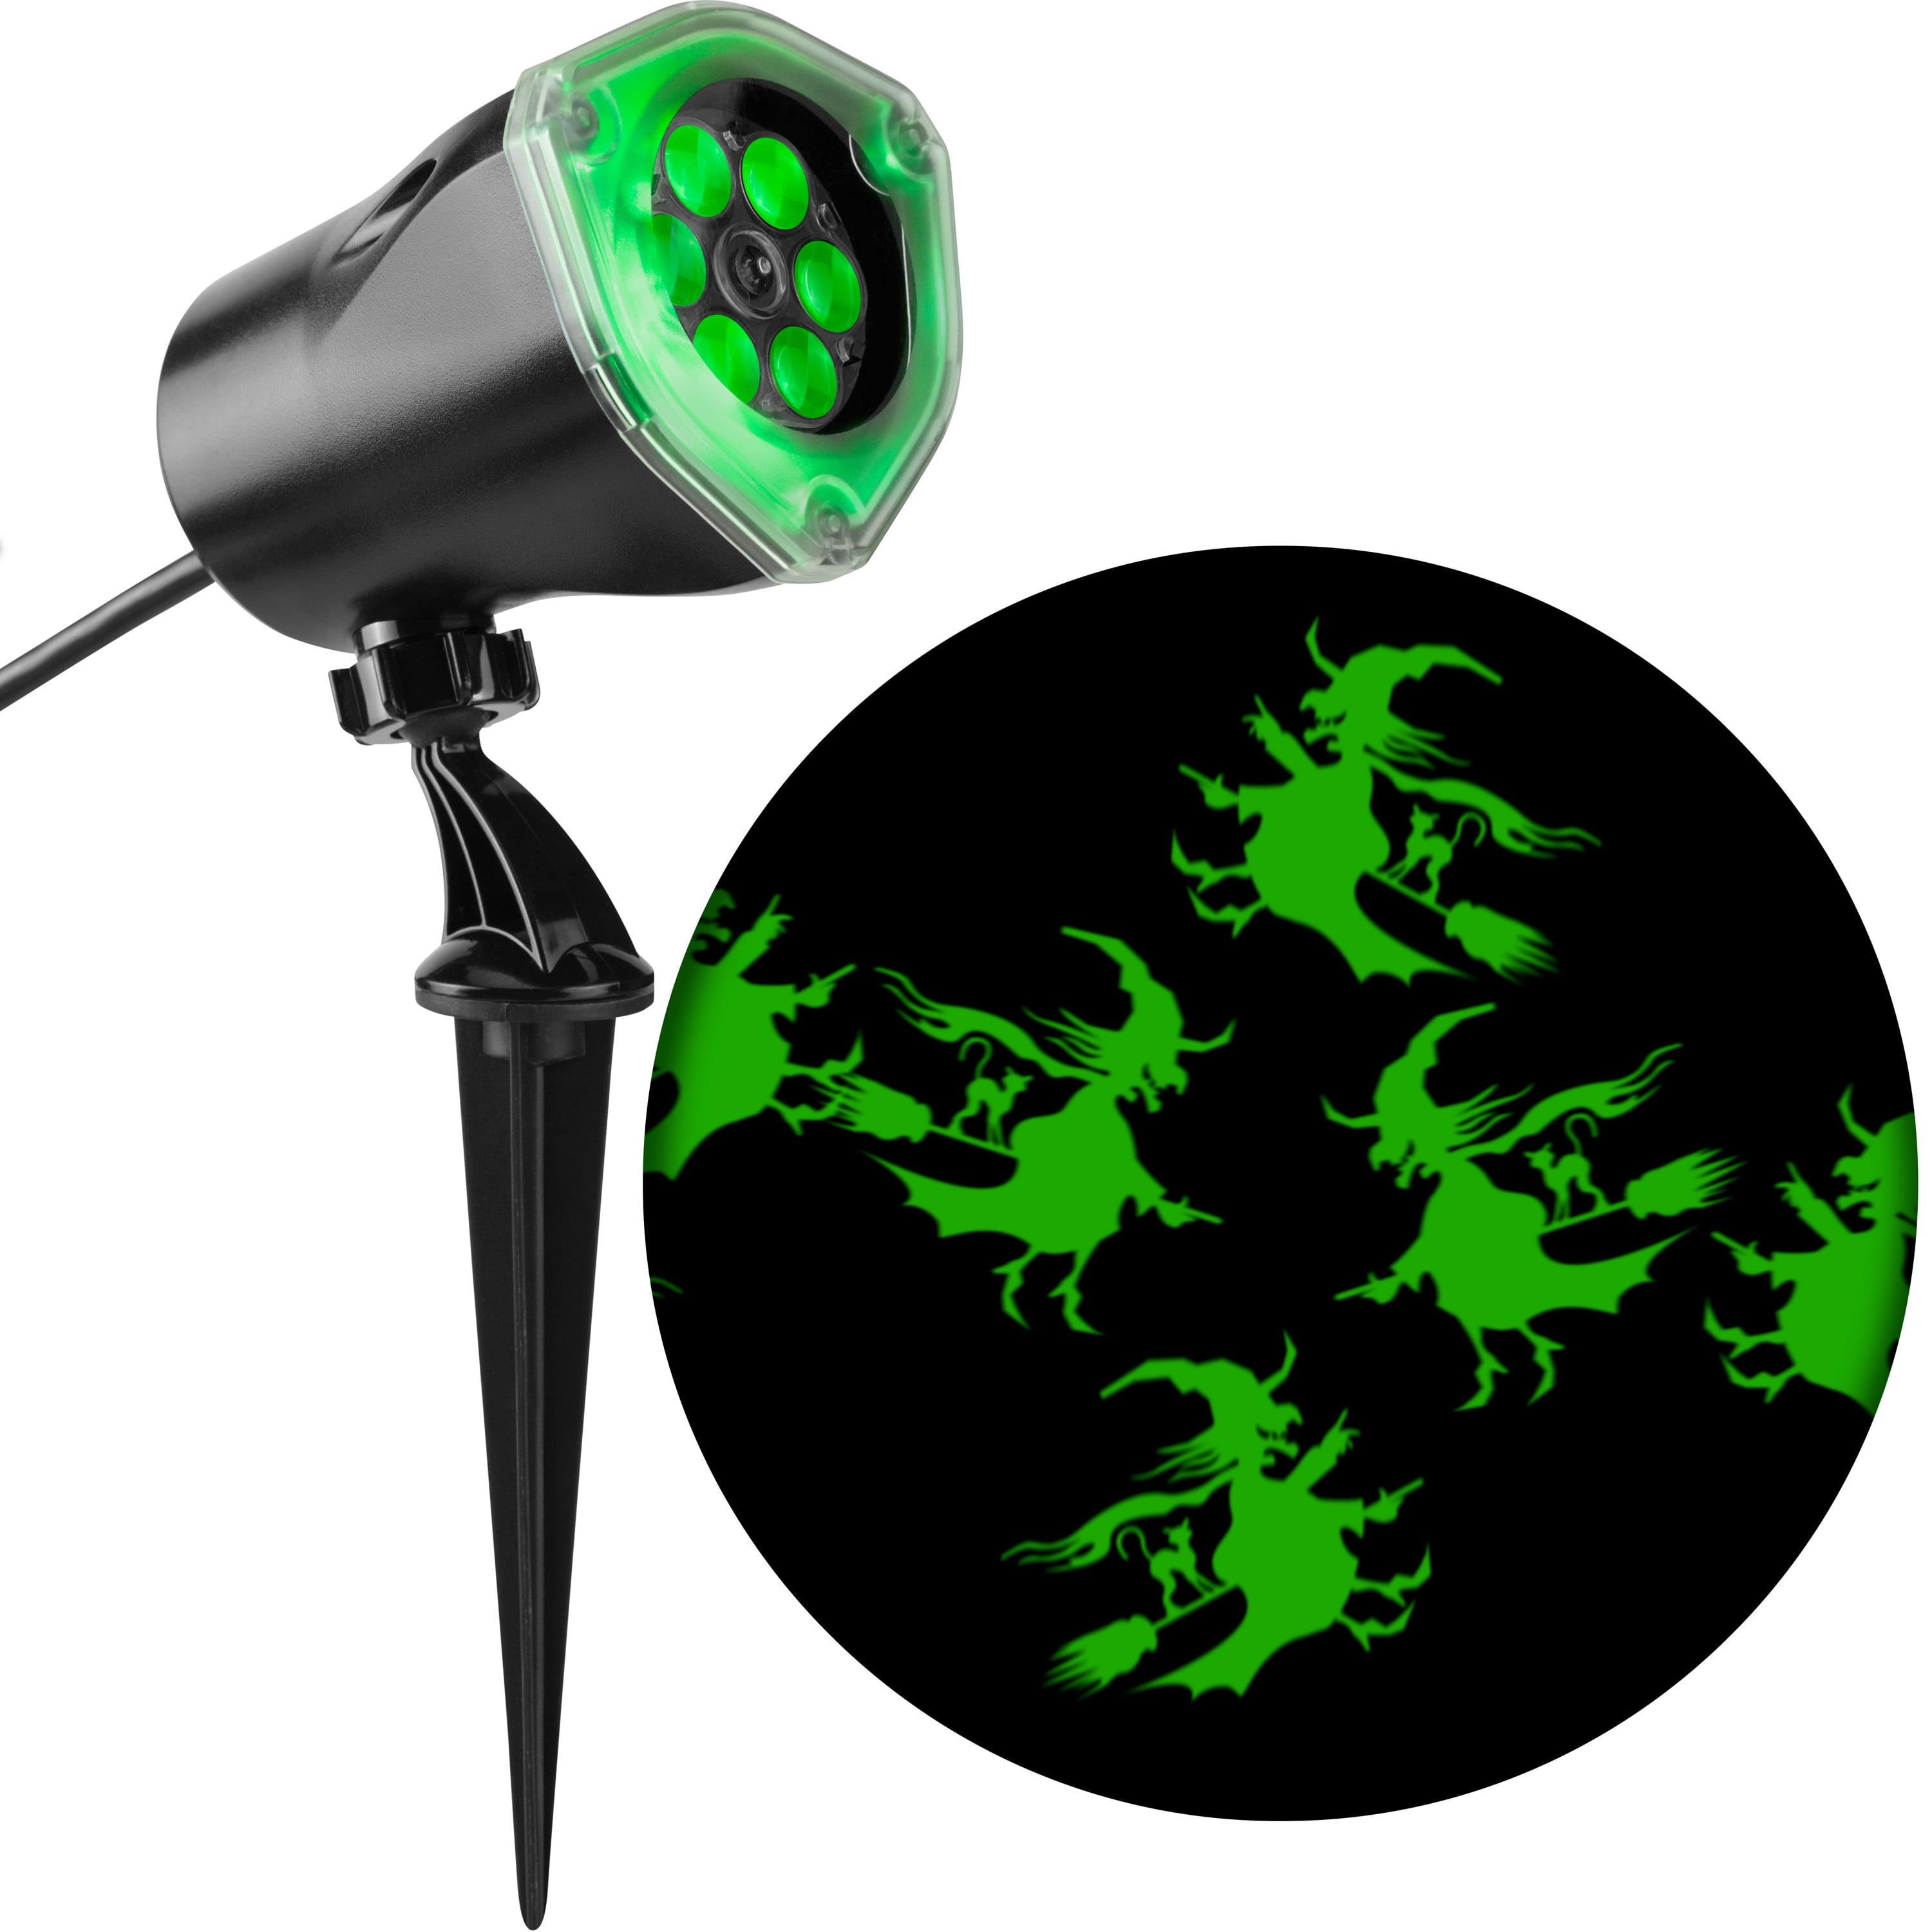 Details about   Gemmy LED LightShow Whirl-A-Motion+Static Multicolor Witch Projection Light 